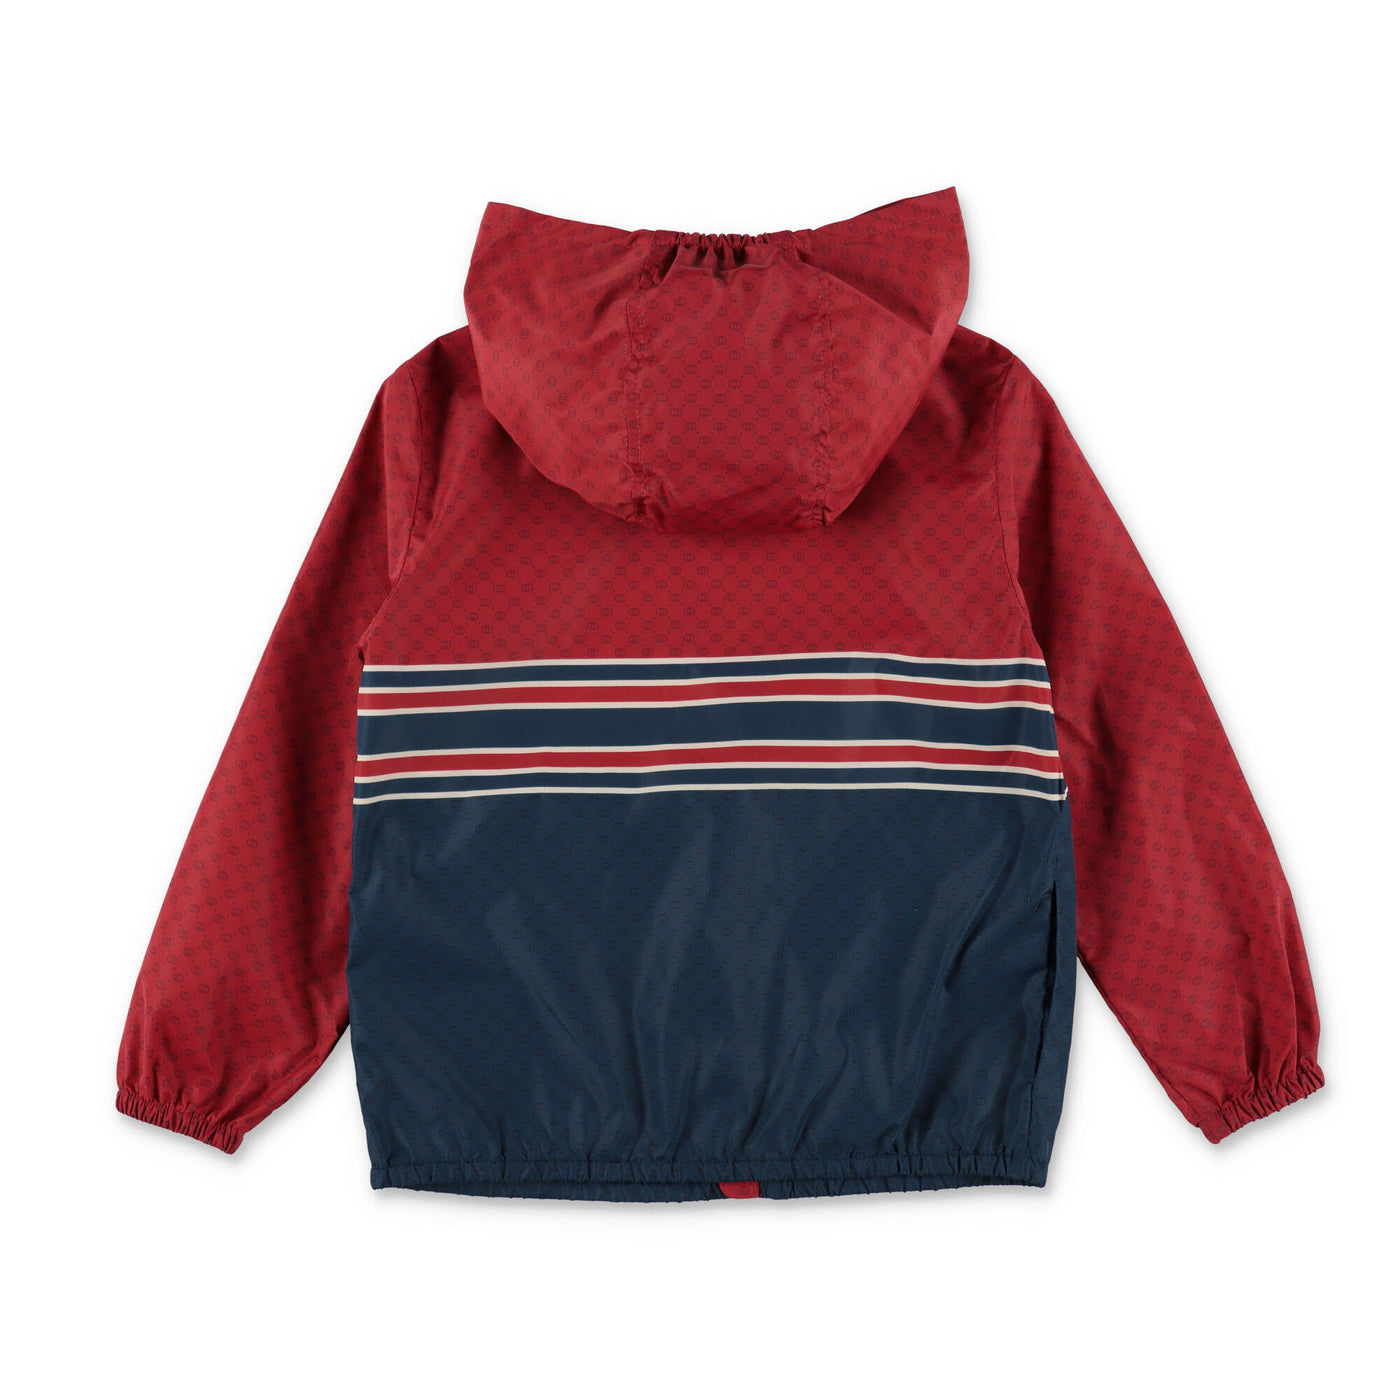 Red and blue nylon boy GUCCI windbreaker with hood